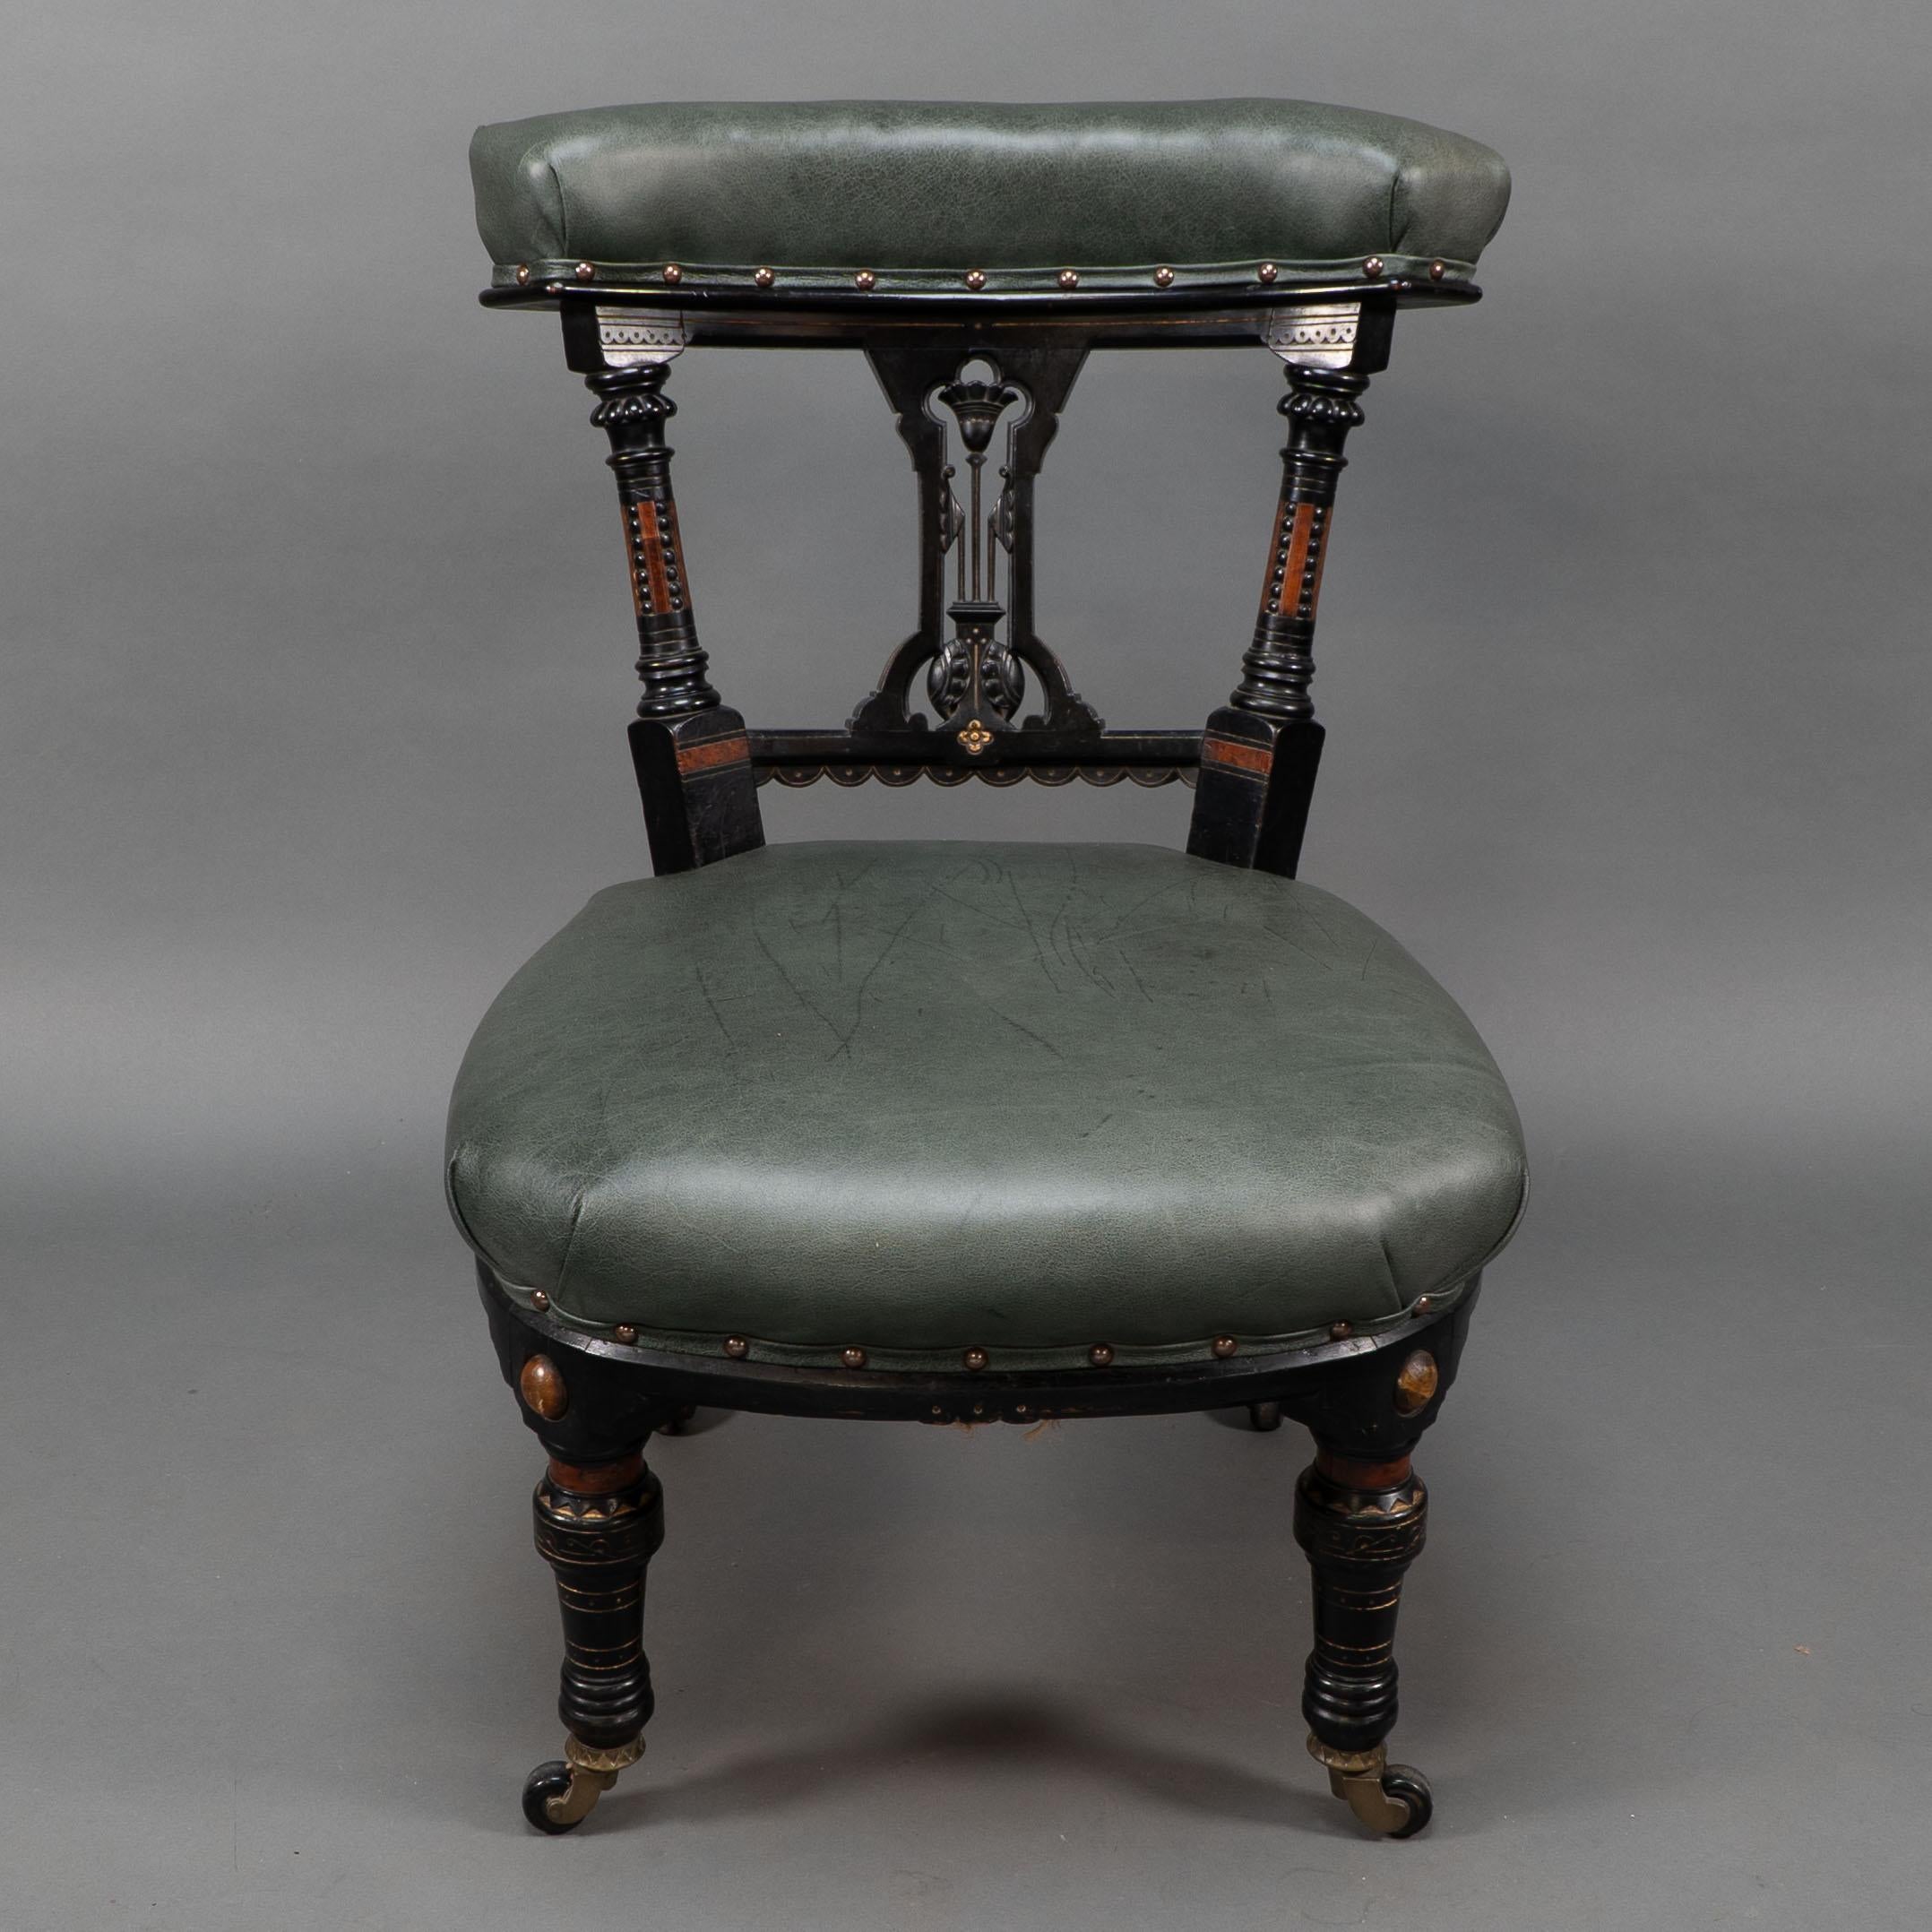 Ogdens of Manchester, in the style Dr Christopher Dresser.
Aesthetic Movement ebonized and parcel gilt walnut nursing chair, with a carved lotus flower, and ring-turned legs with original brass and ceramic casters, the casters stamped with a Patent